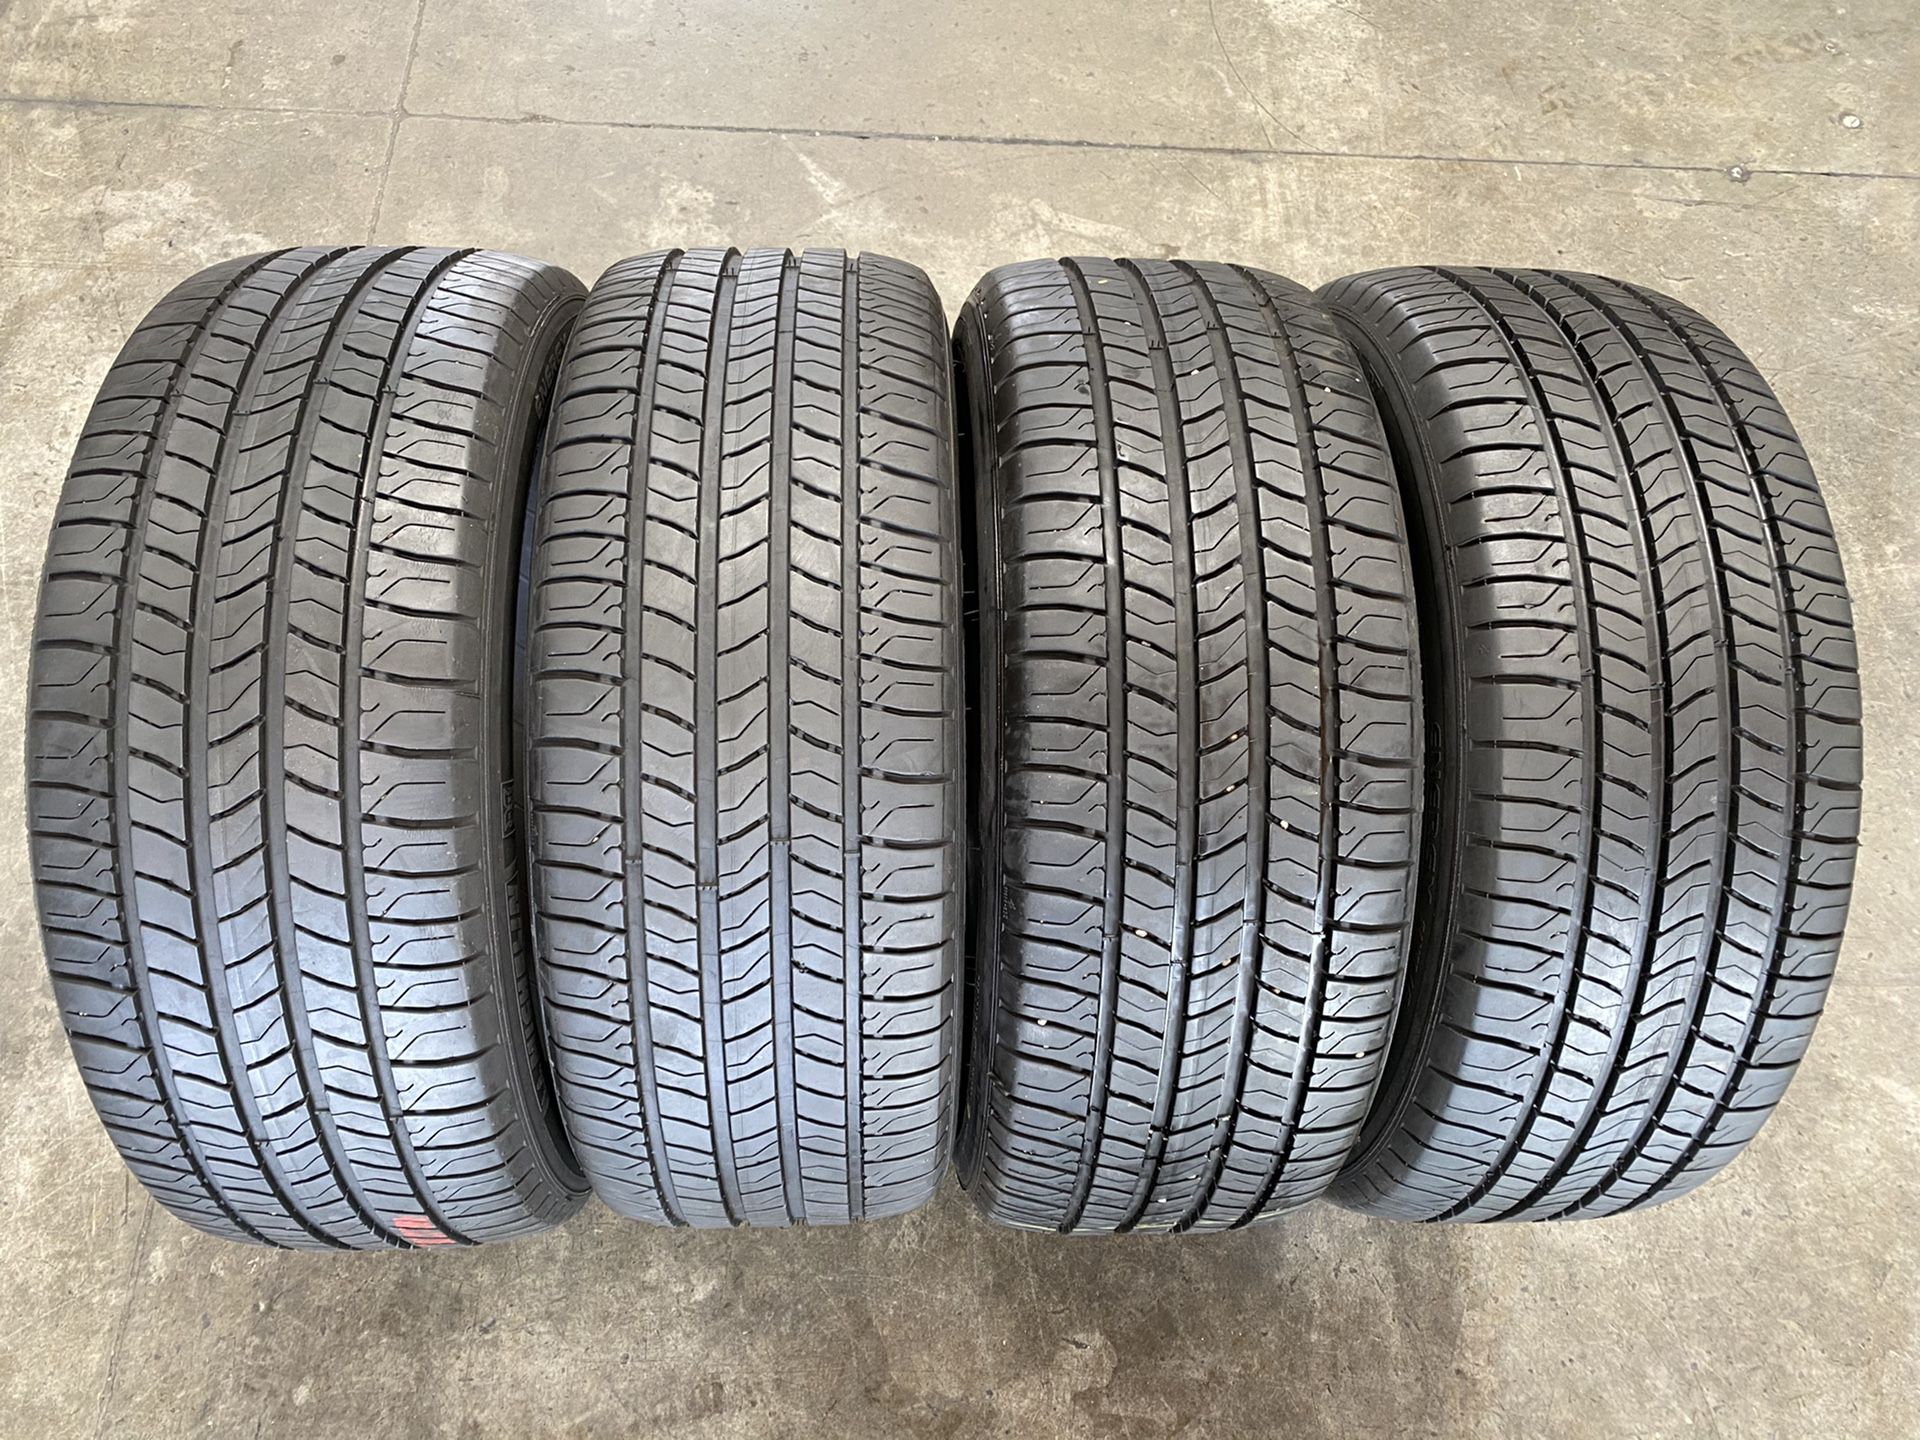 find-michelin-energy-saver-a-s-m-s-p225-50r17-93v-in-buffalo-new-york